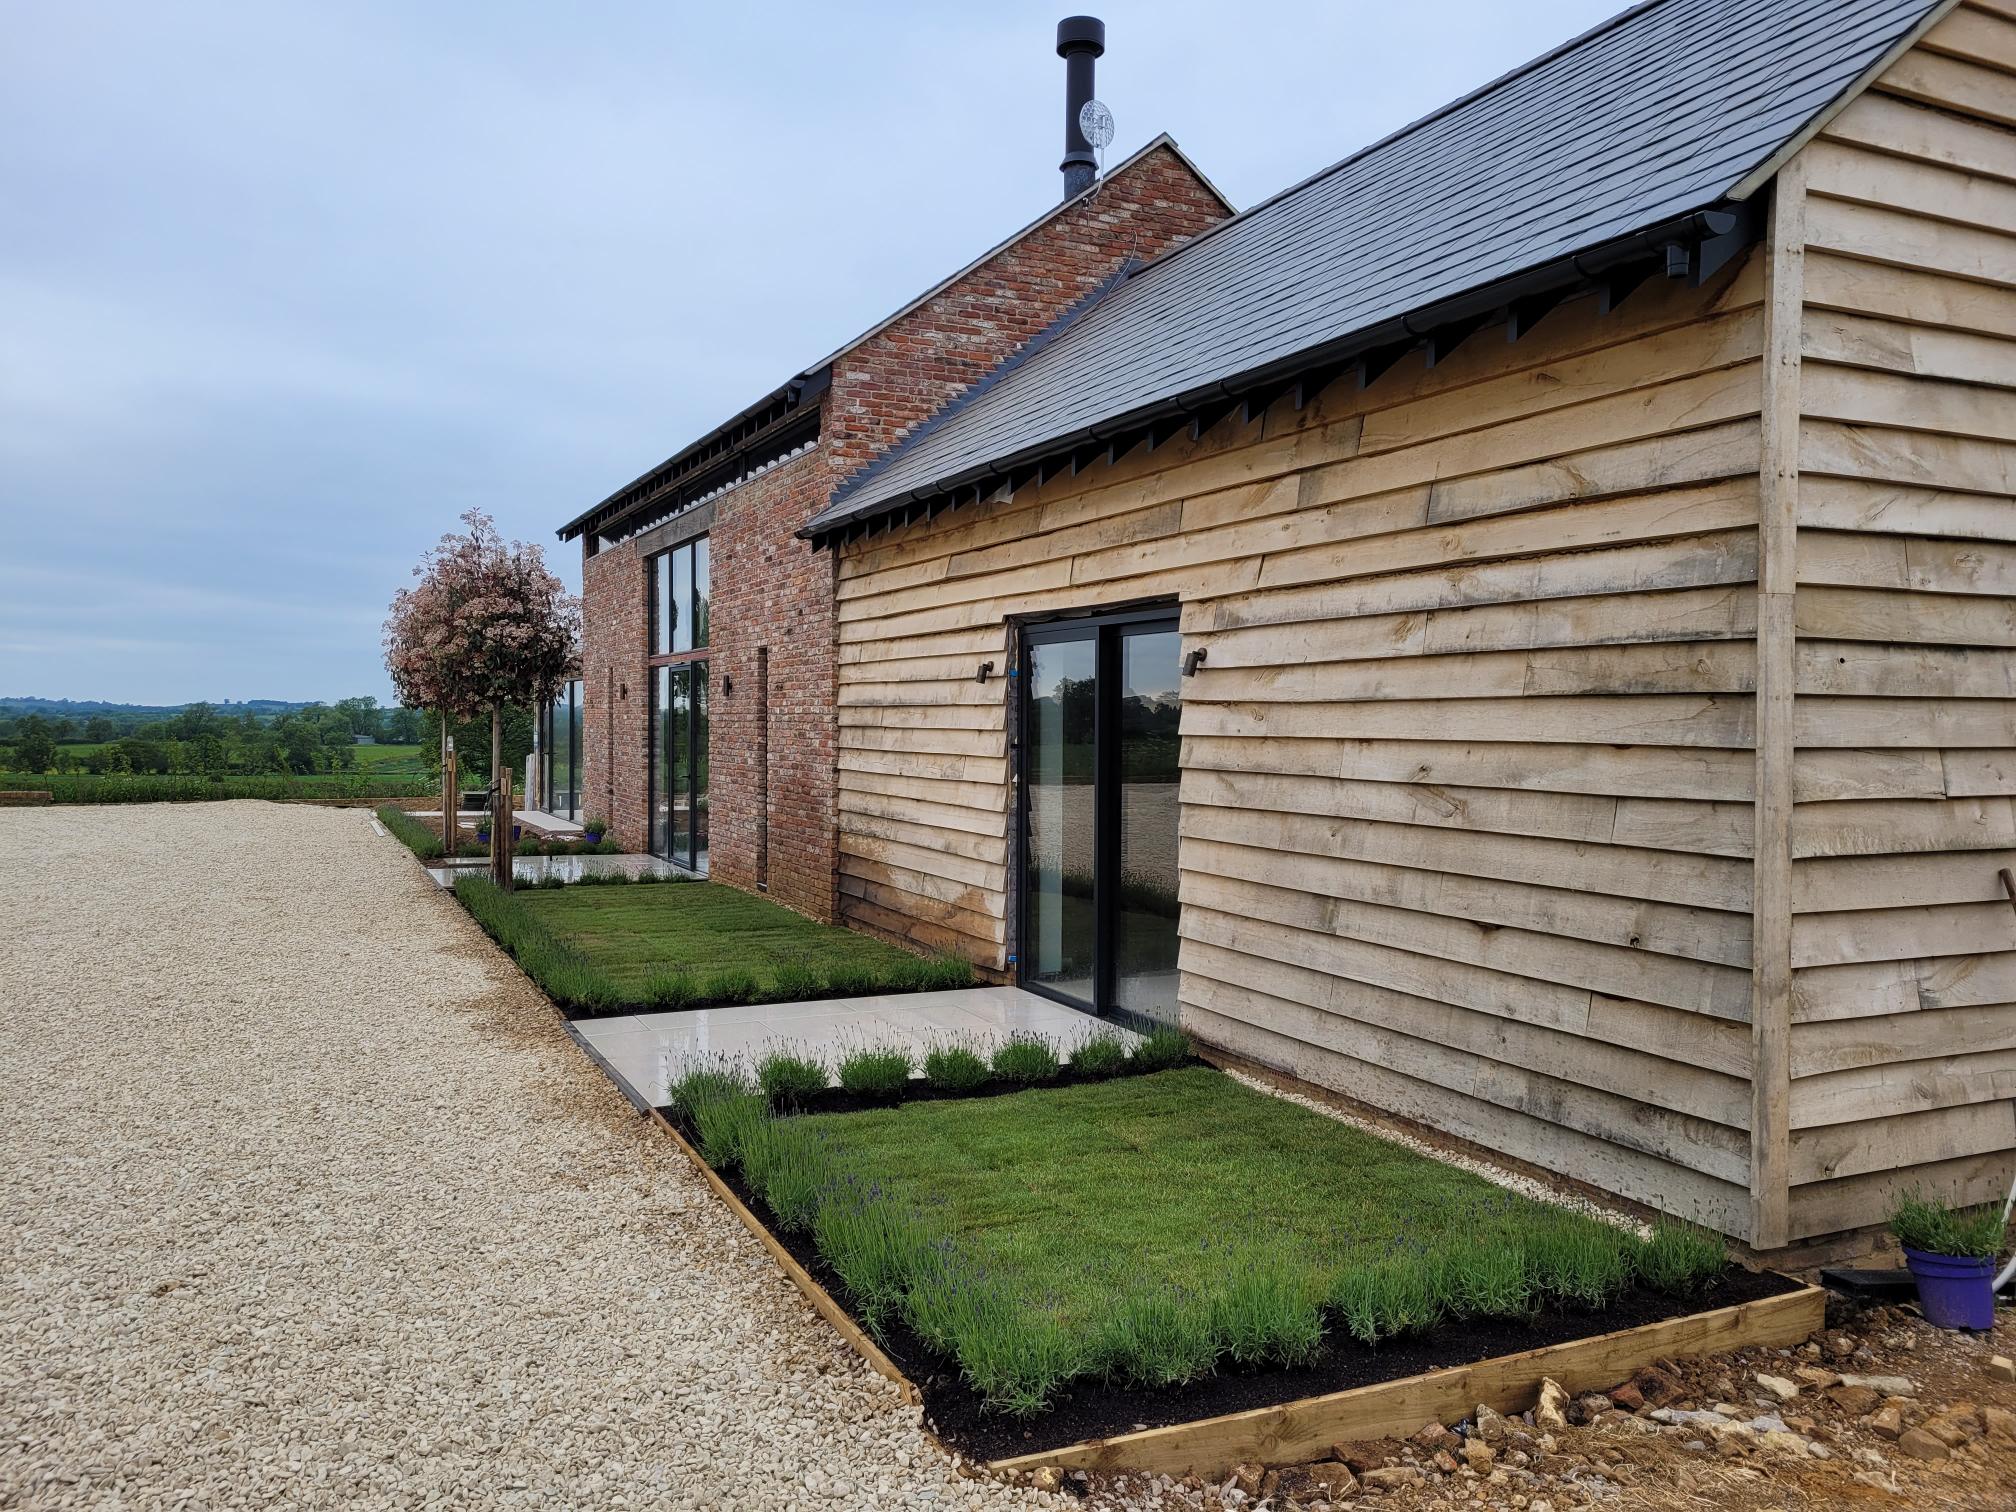 Detached 4-bed new build Barn in Daventry, Northamptonshire.